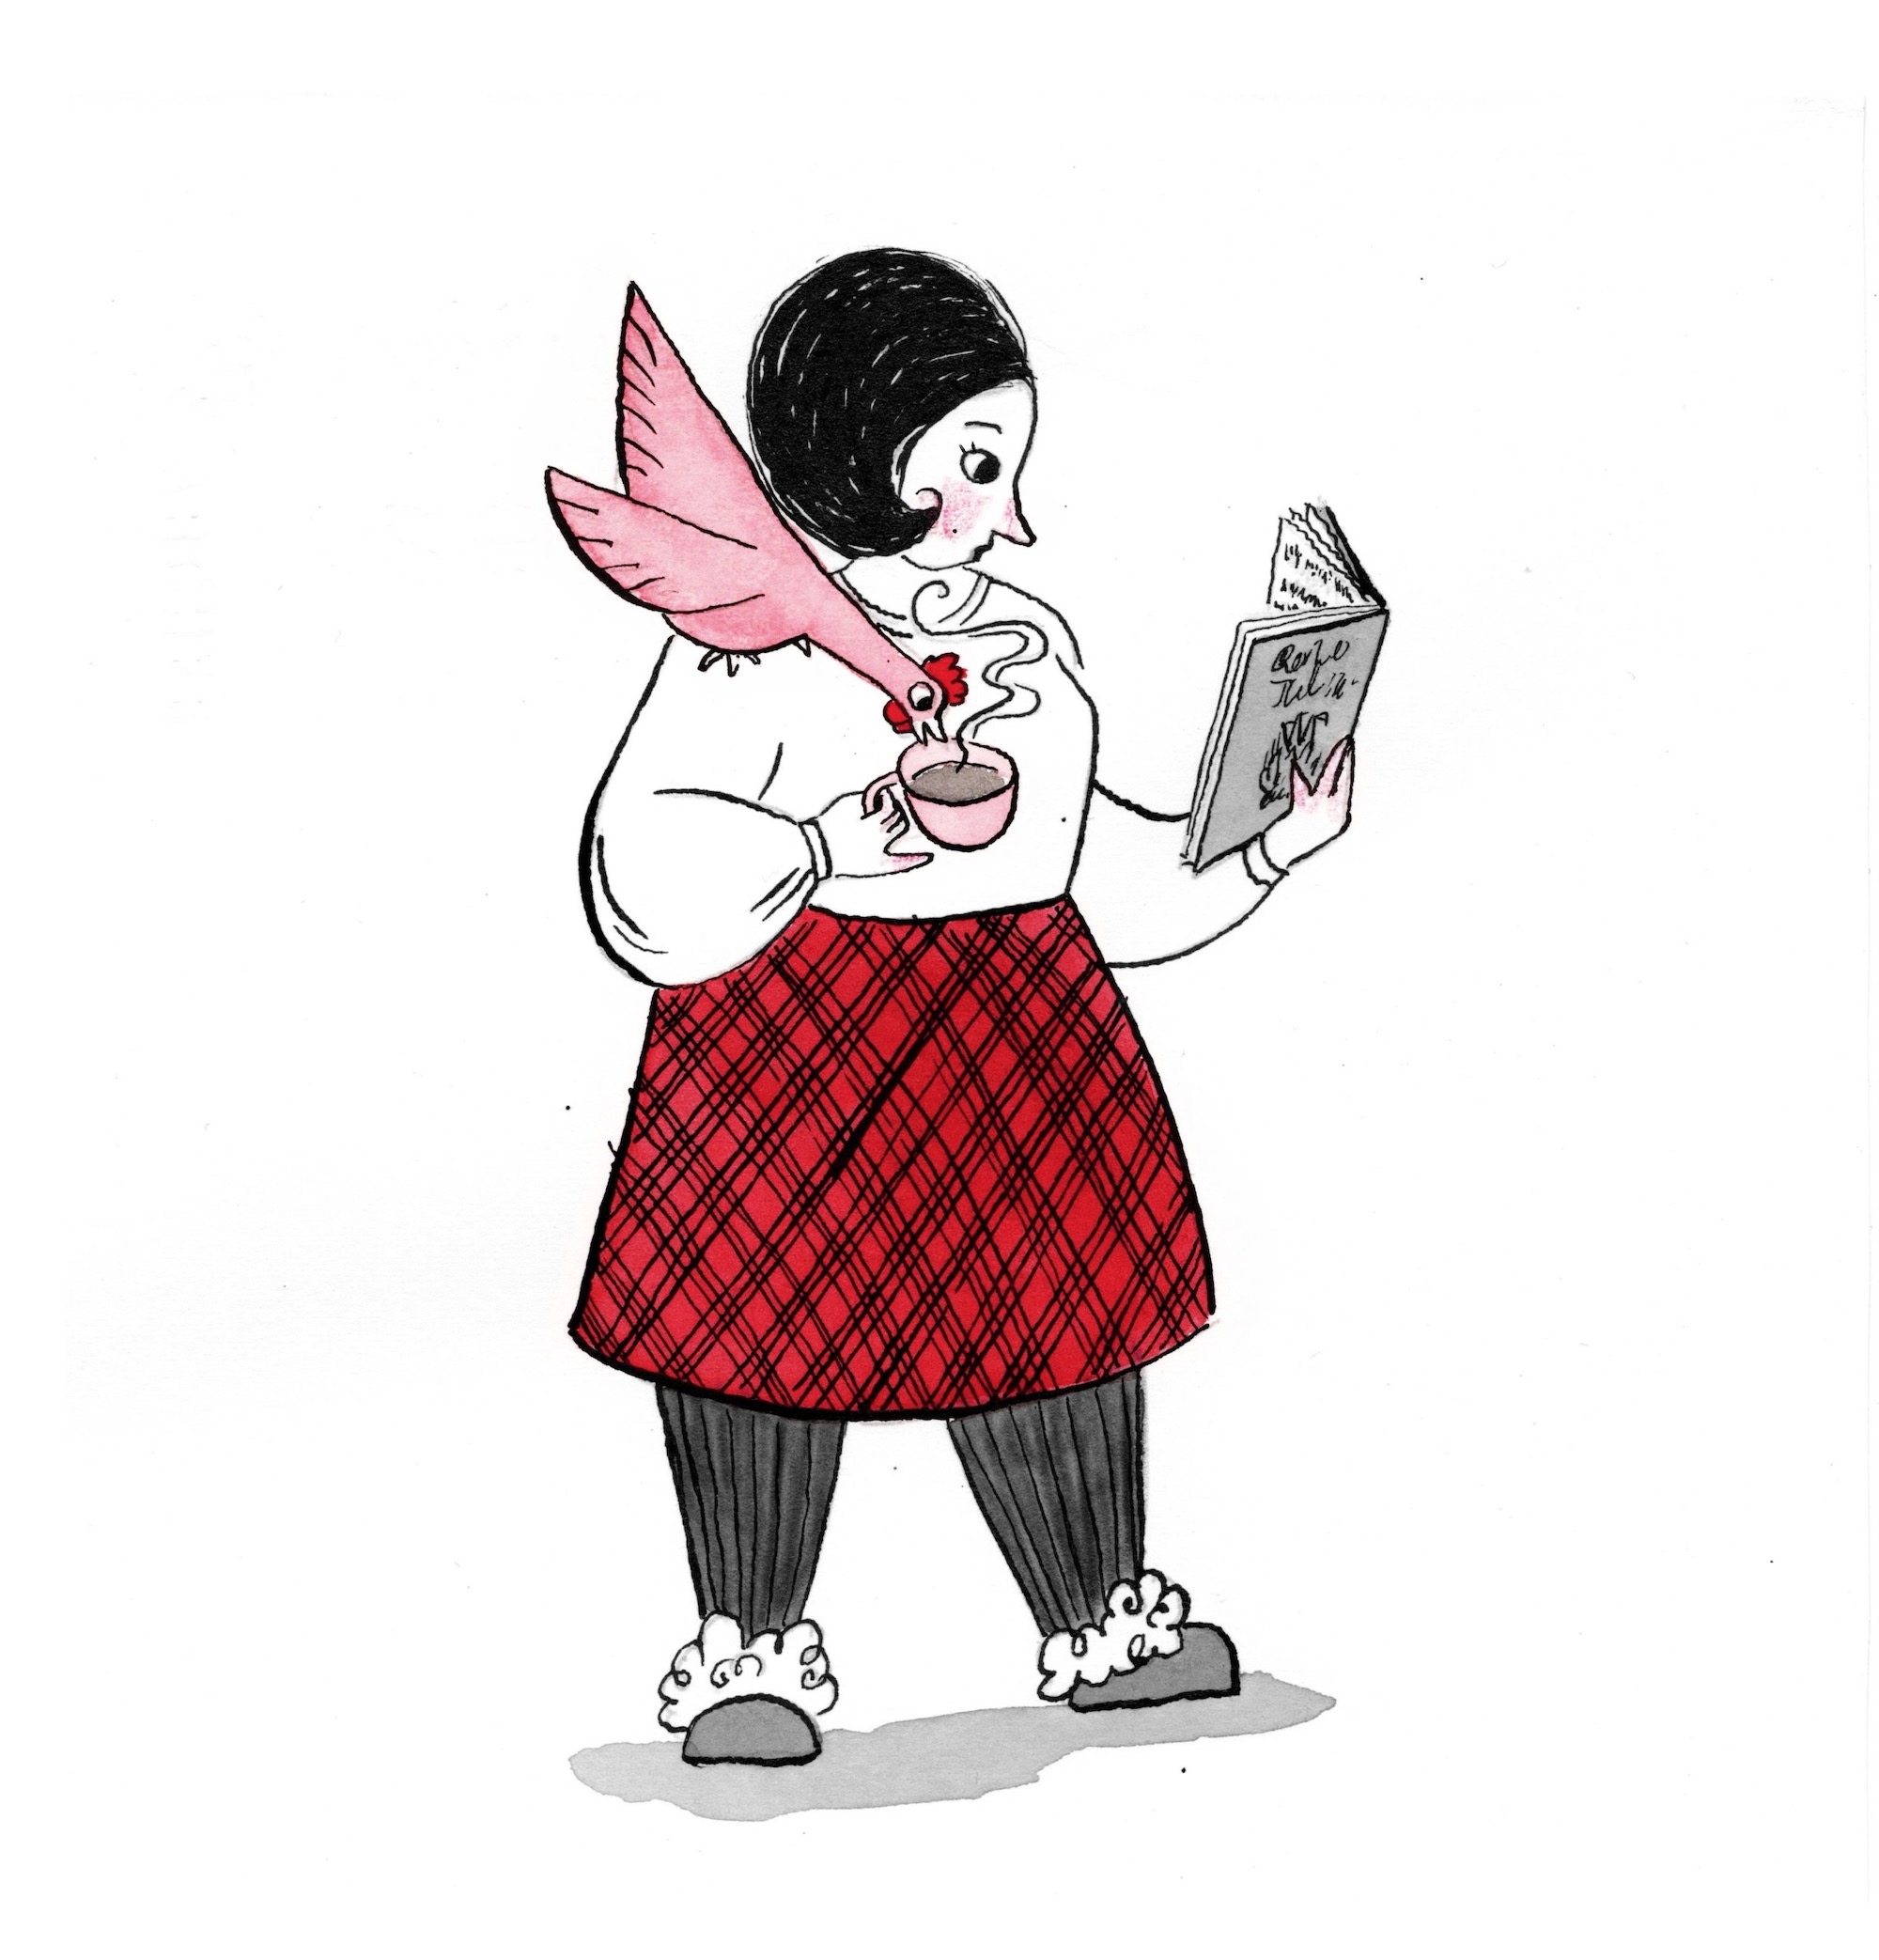 Black, white, and red ink illustration of a woman wearing a tweed skirt with a book in one hand and a tea cup in the other. She has a chicken perched on her shoulder. The chicken is trying to drink her tea while she is distracted by her book.